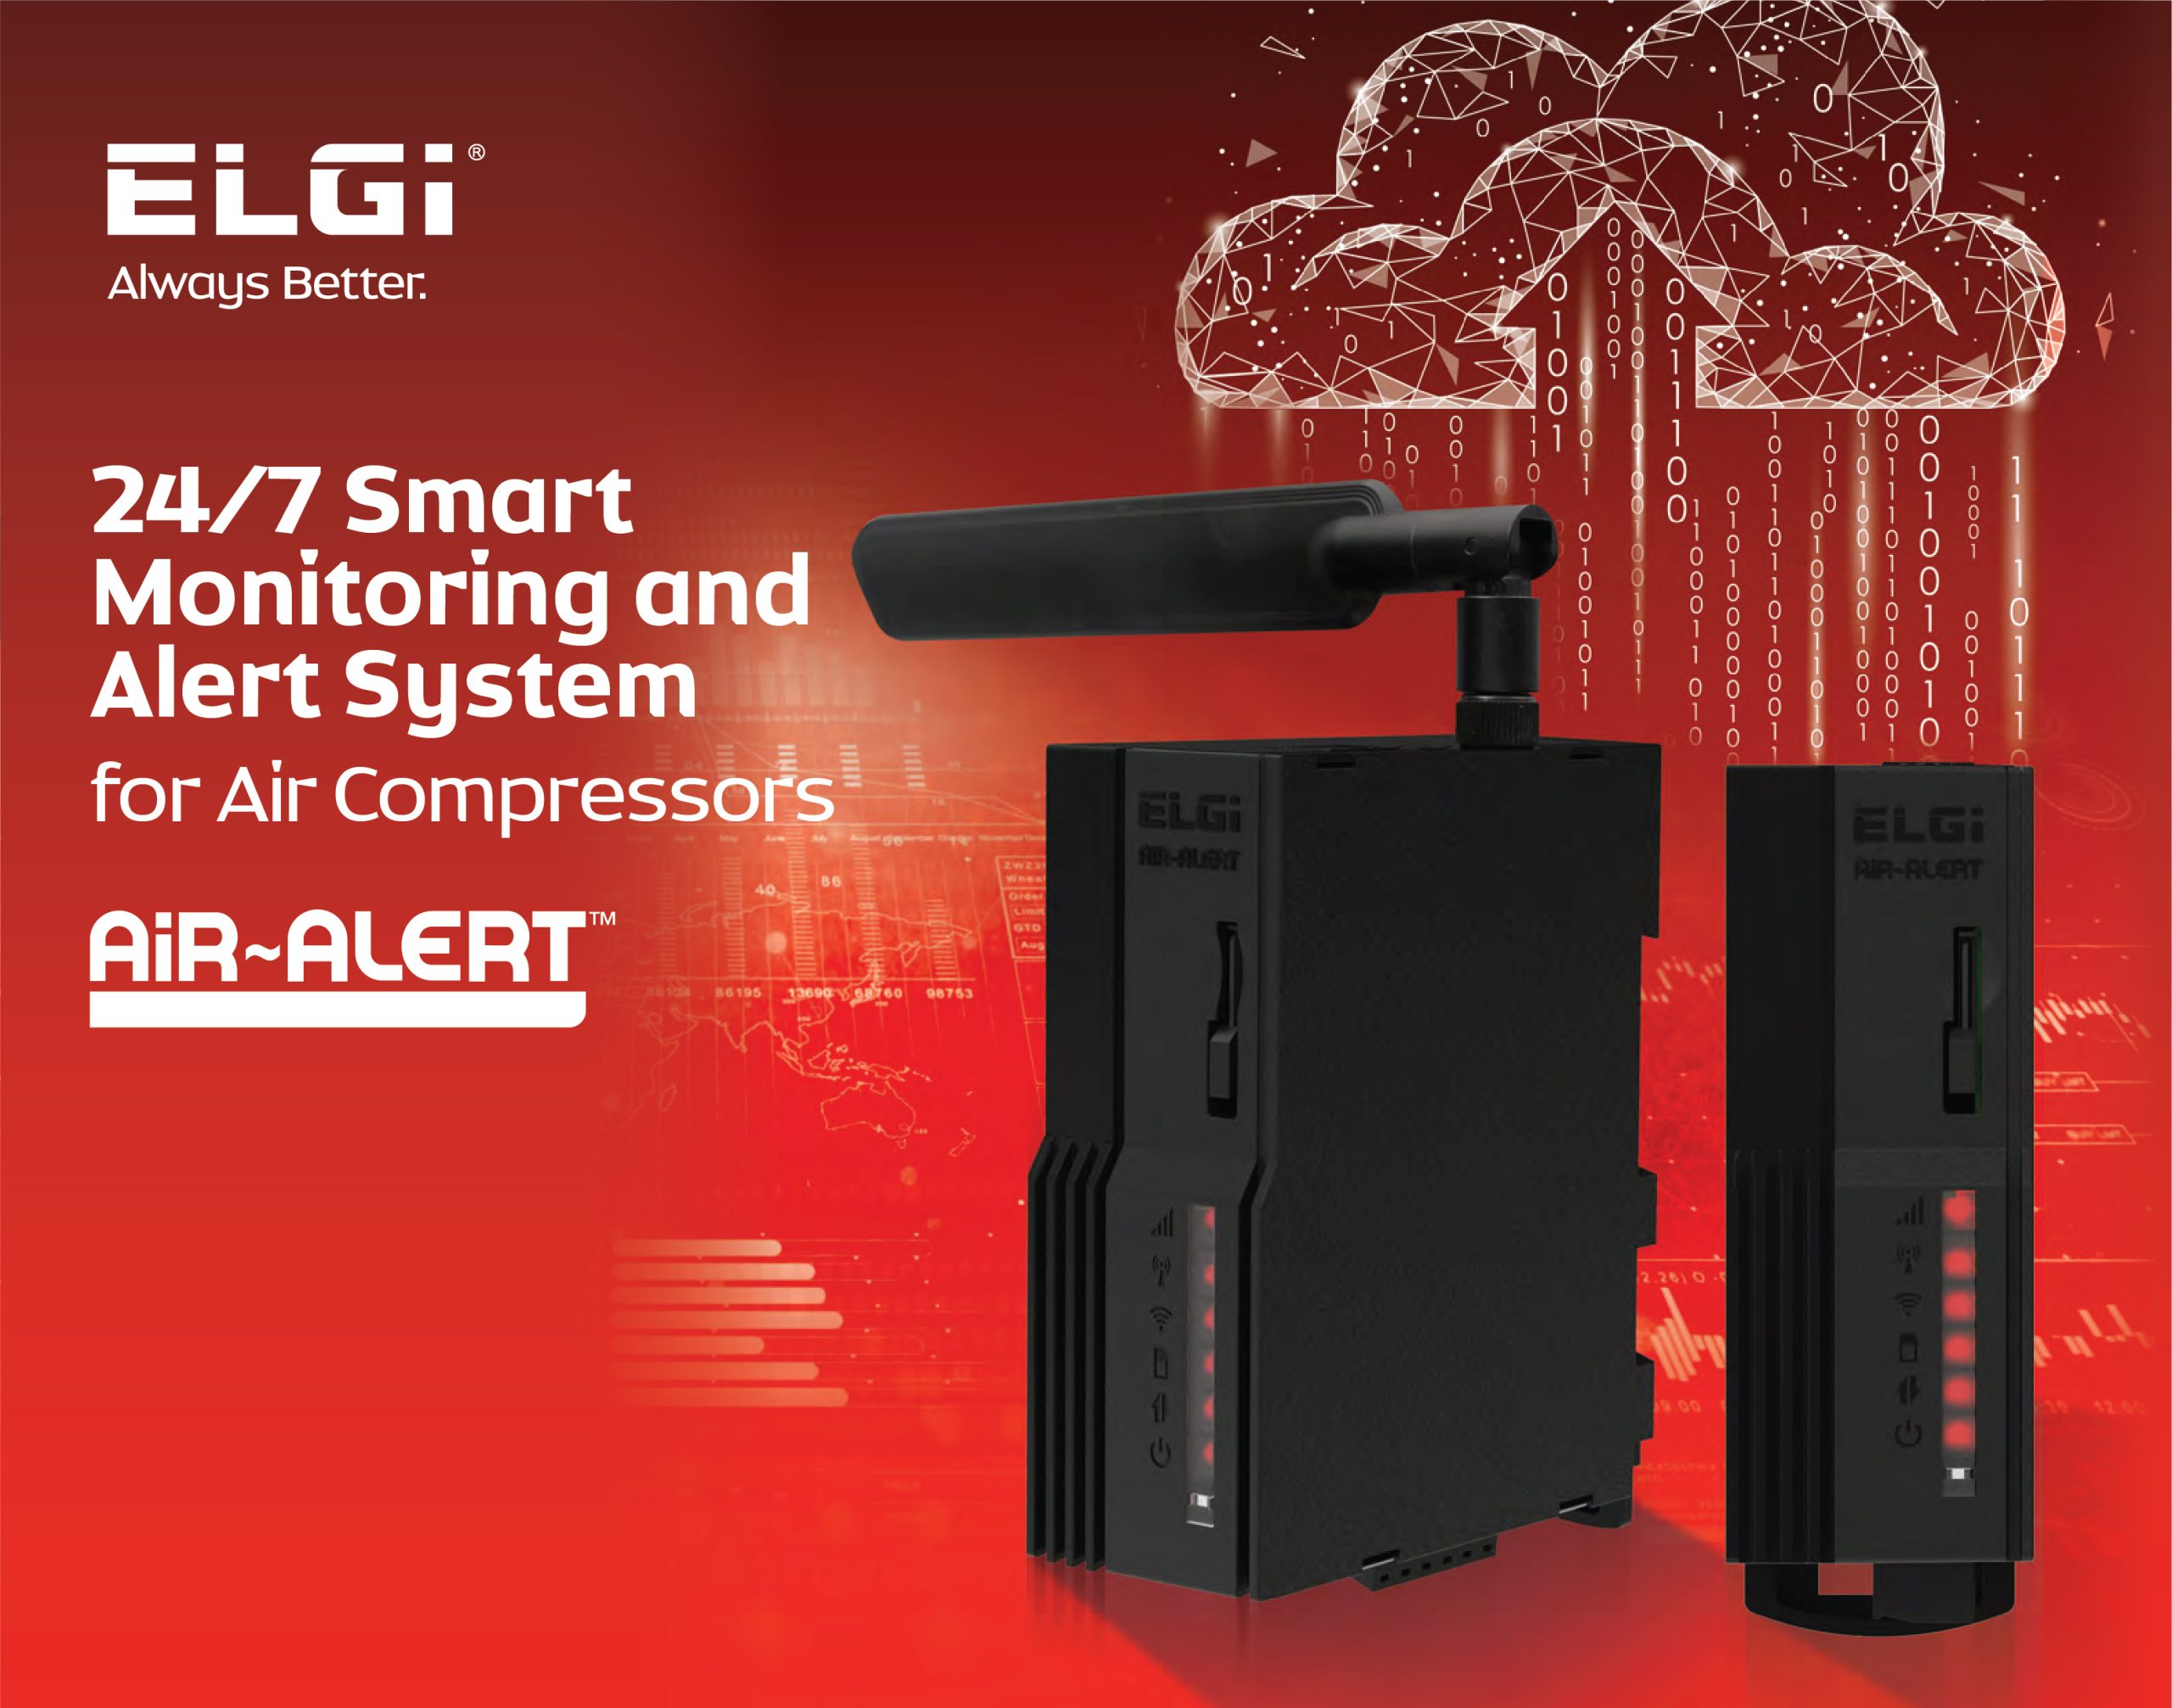 ELGi introduces smart monitoring system- Air~Alert in India